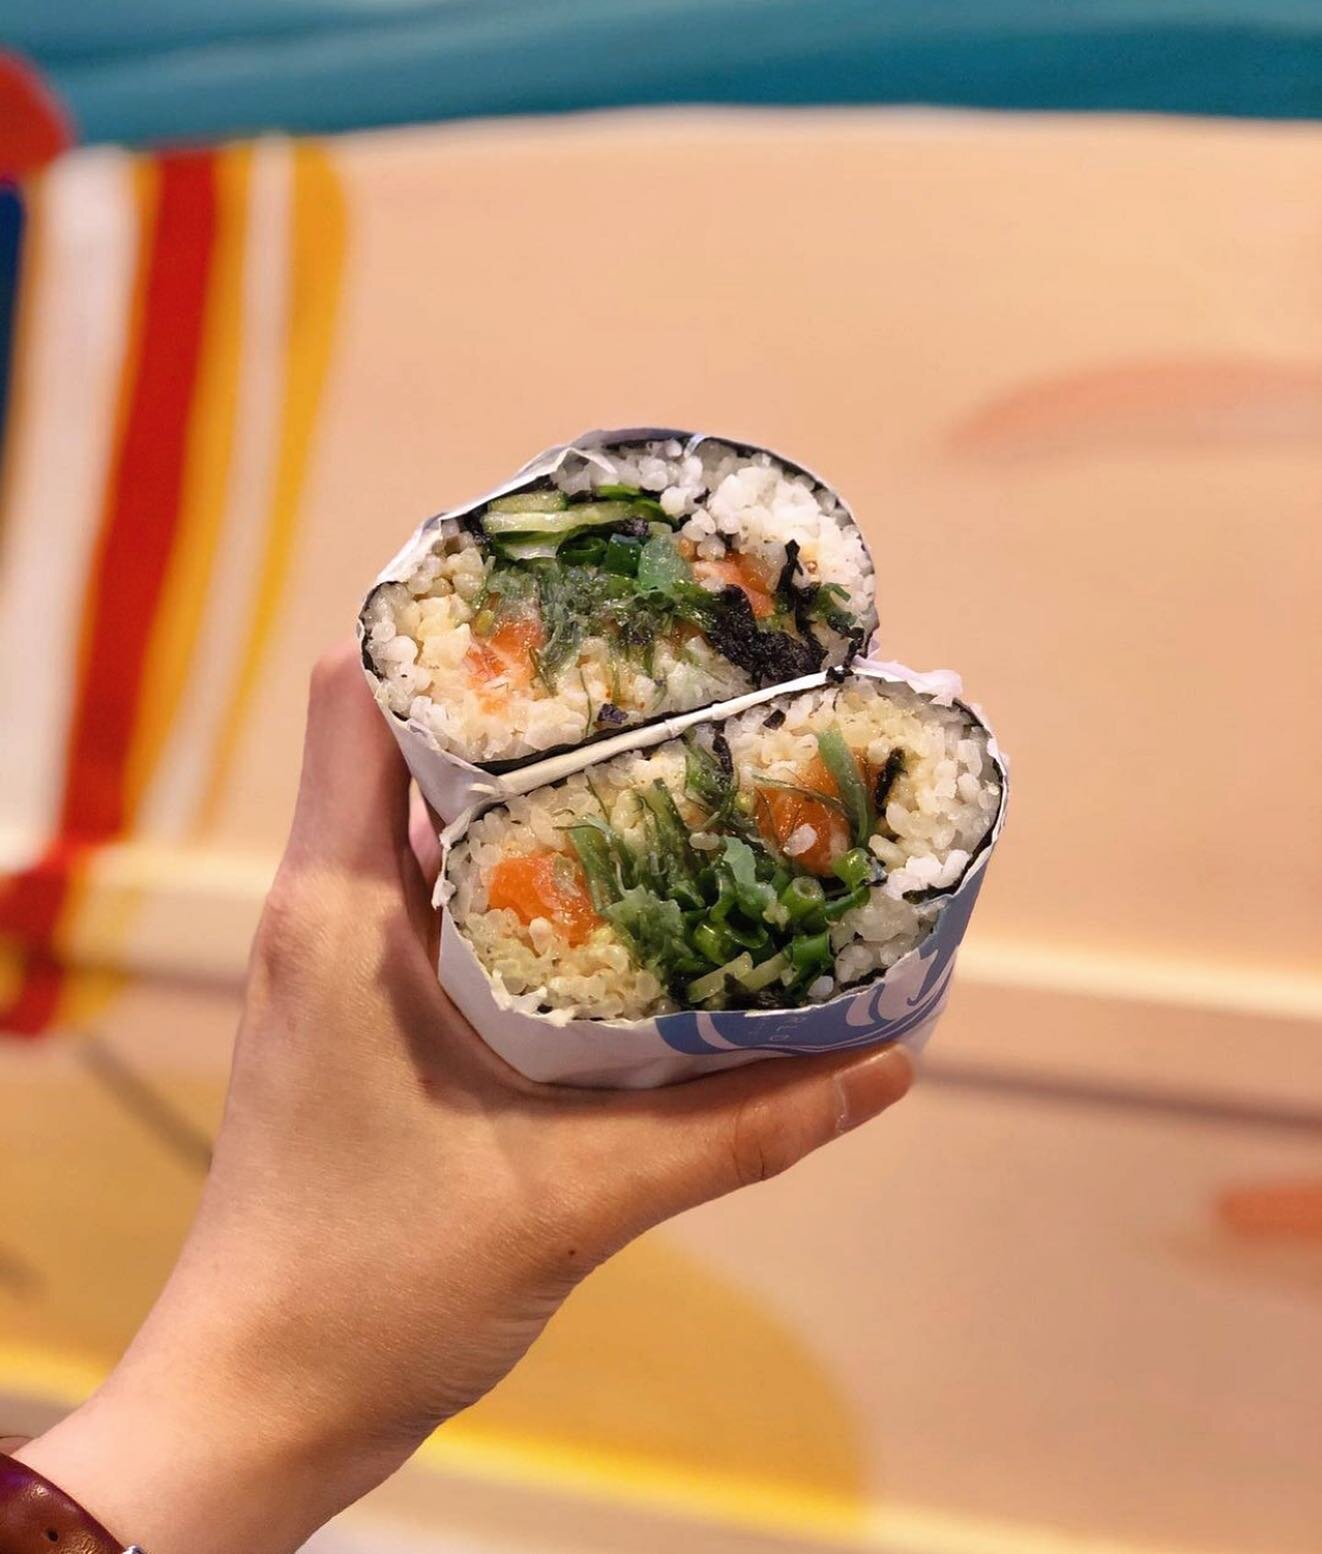 Got Easter plans? Roll in and try our signature pokiritto! We customize it just the way you want it 🌯😋 
.
Our Sheung wan branch is open throughout the Easter weekend as usual. We are closed only on Monday, April 5th
.
See you there !
.
.
P.S. Kwun 